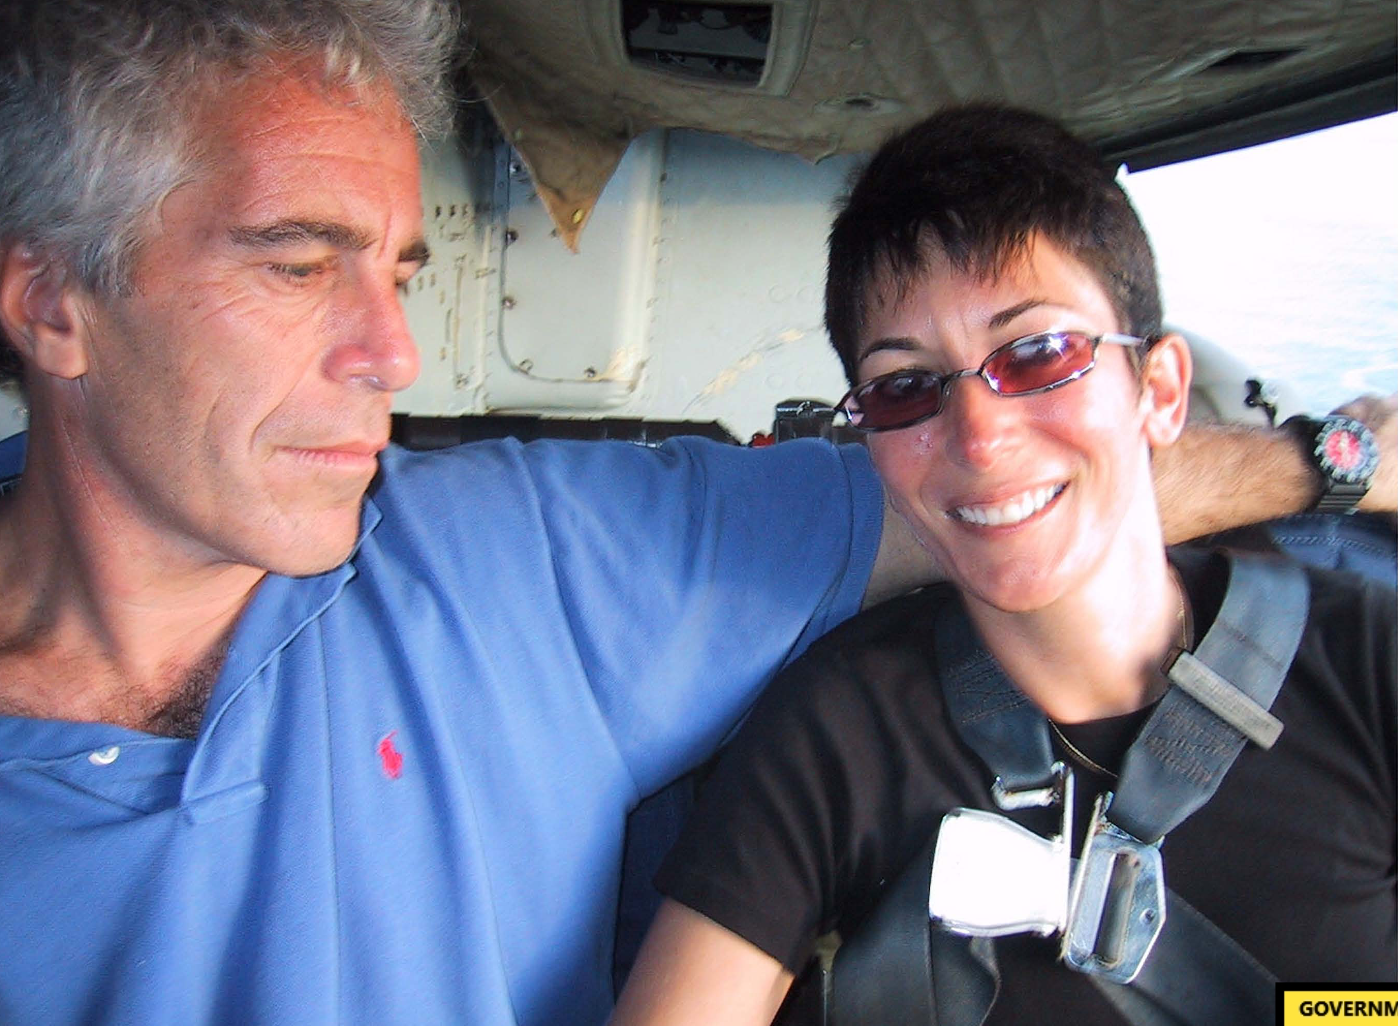 An undated photo of Epstein with Maxwell on a plane